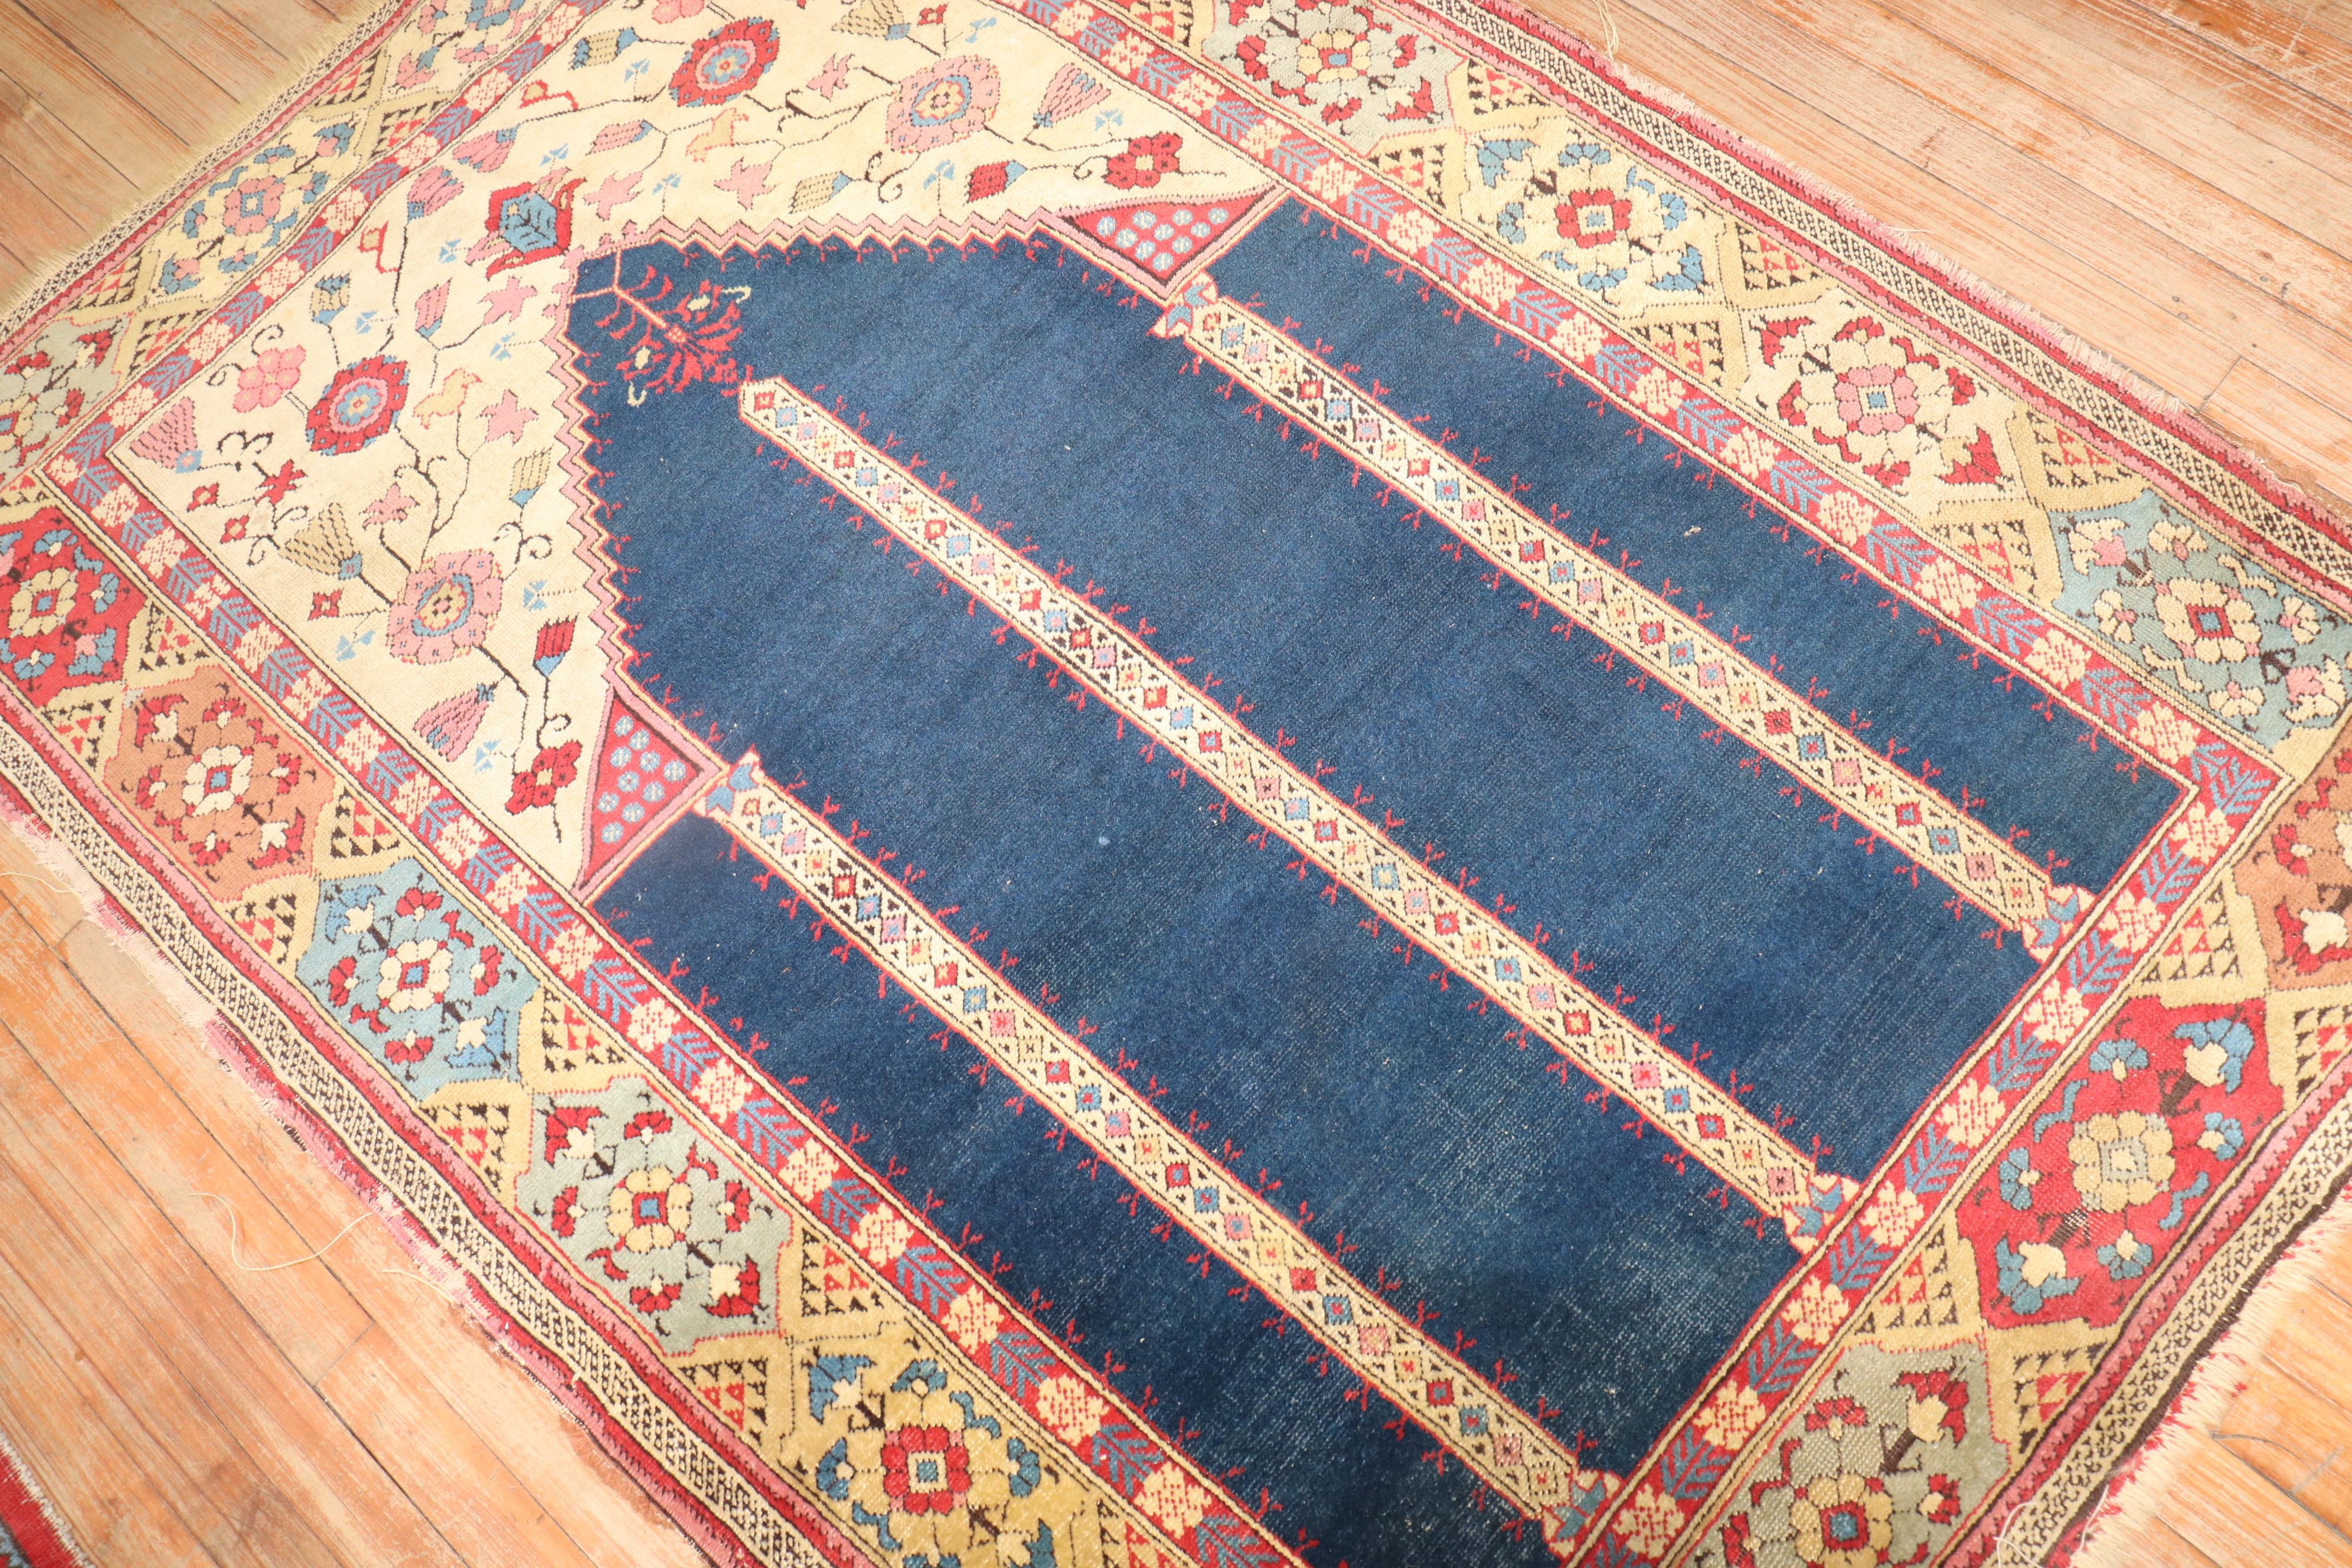 Late 19th century Transylvanian Tuduc Romanian Prayer rug with a double scroll niche design on a striking navy field.

Measures: 4'1'' x 5'10''.